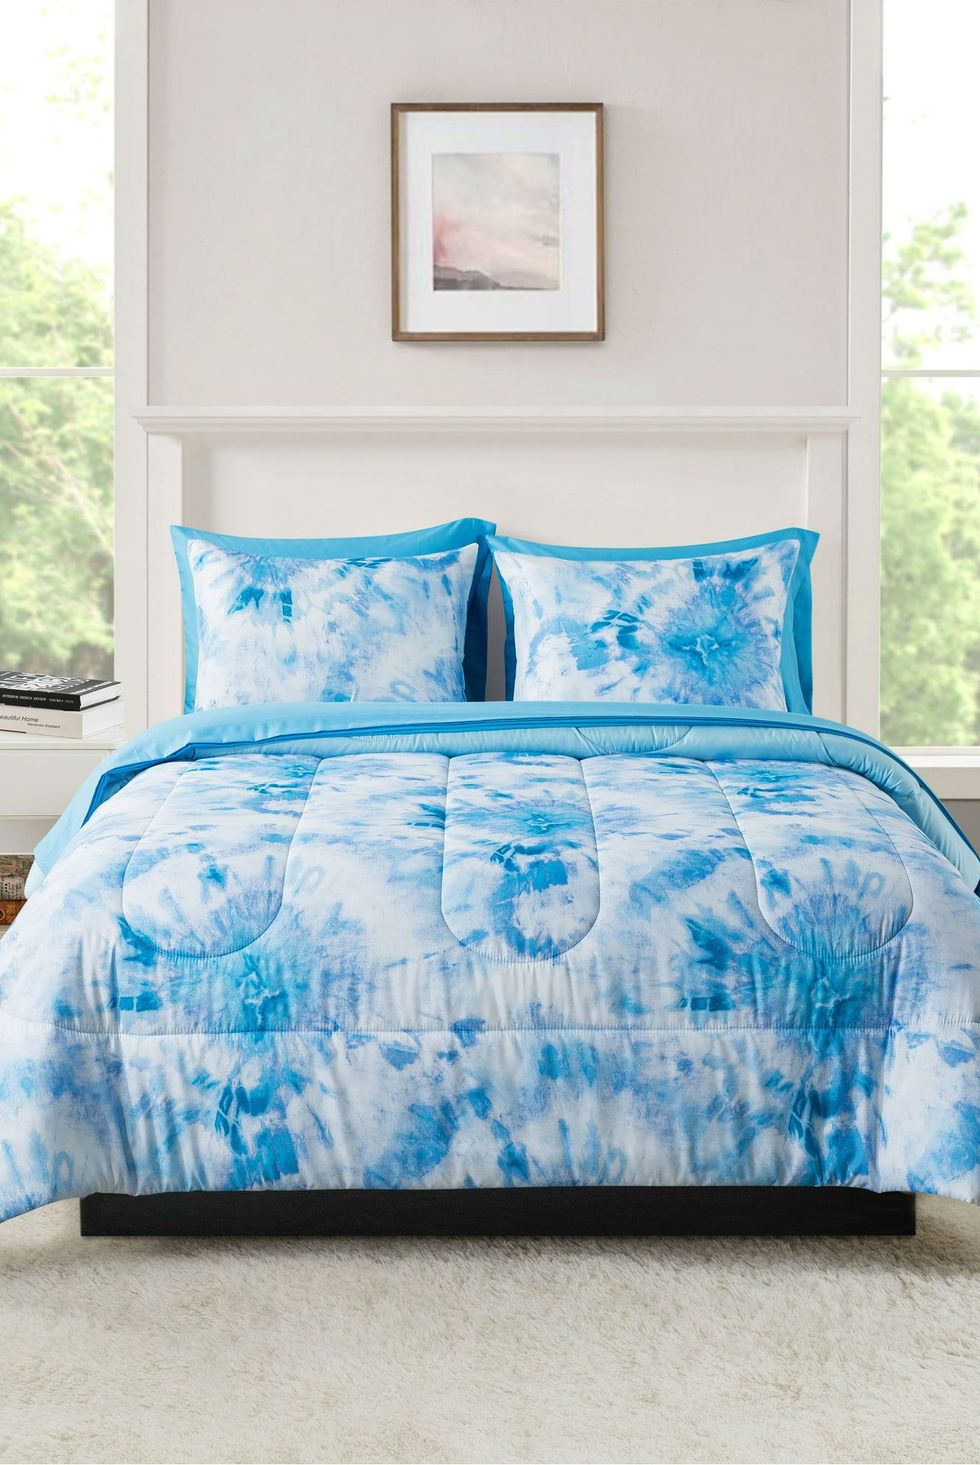 Blue Tie Dye 5 Piece Bed in a Bag Comforter Set with Sheets, Twin XL